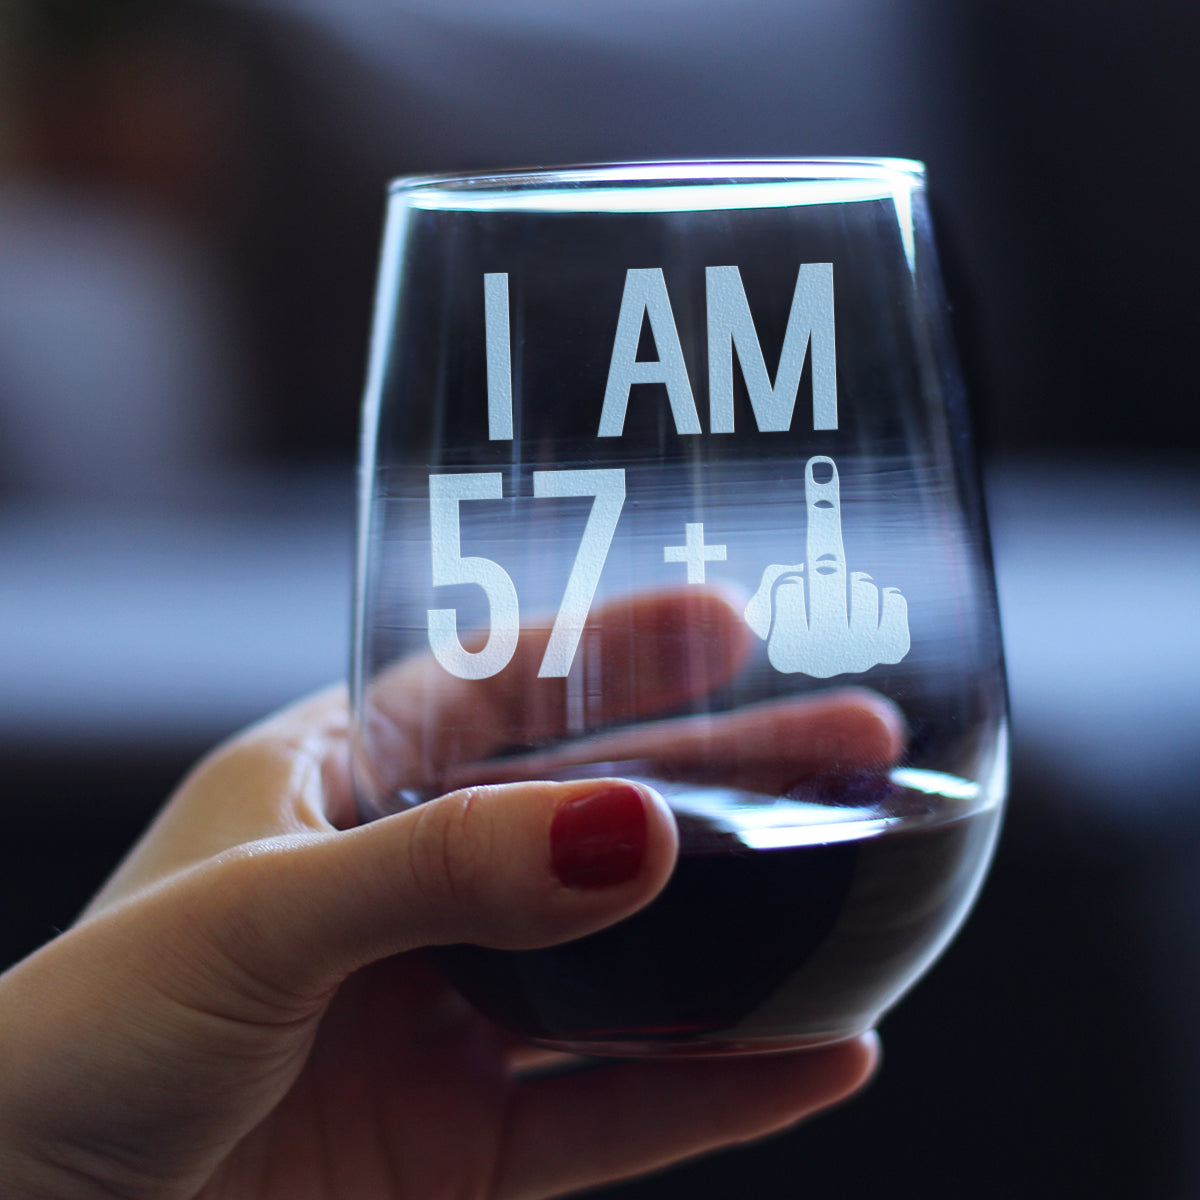 57 + 1 Middle Finger - 58th Birthday Stemless Wine Glass for Women